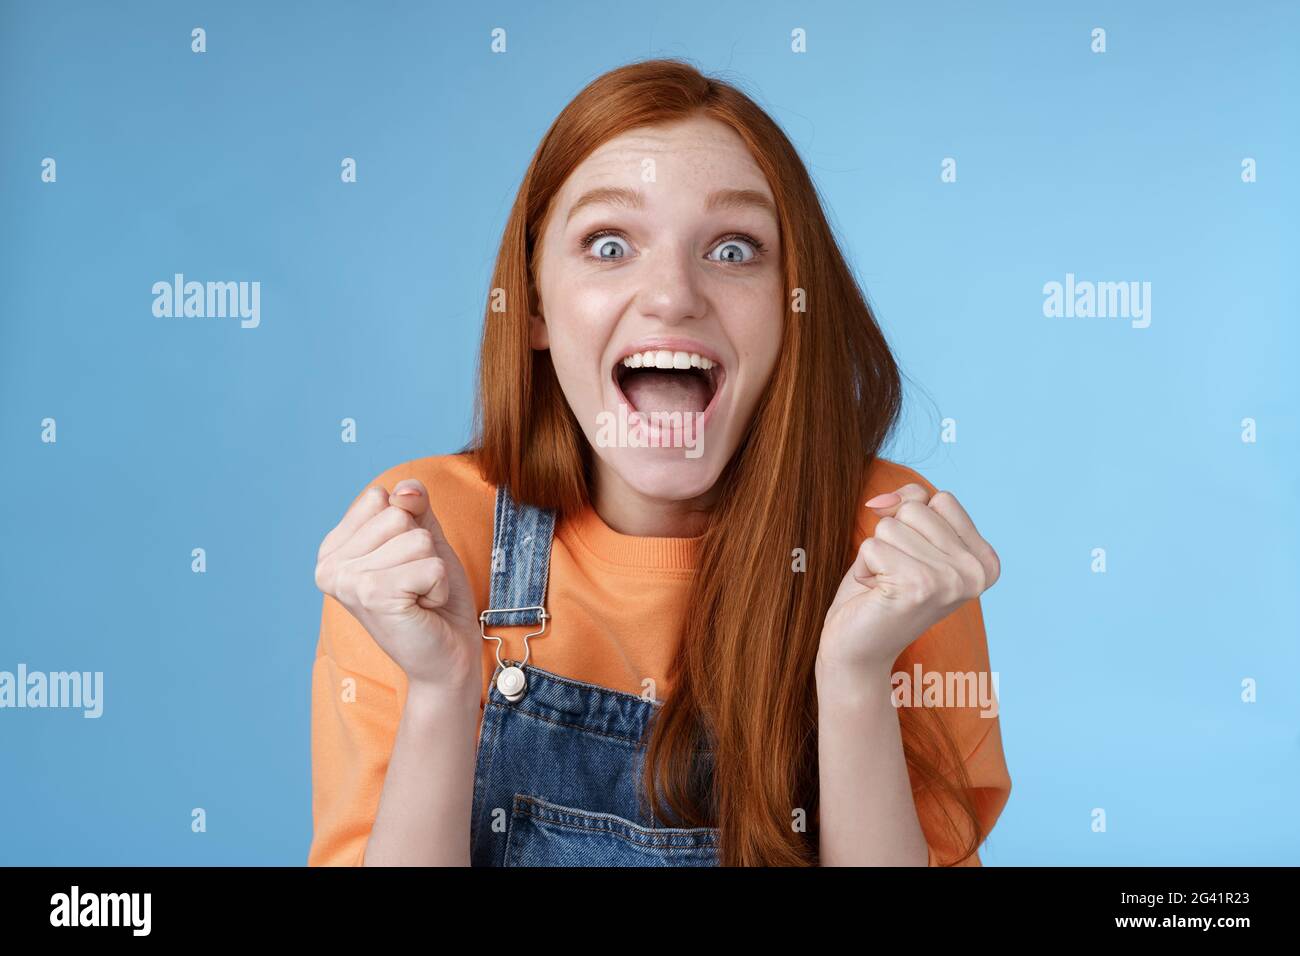 Excited happy overwhelmed cute ginger girl blue eyes yelling out loud rejoicing fantastic awesome news clench fists triumphing c Stock Photo